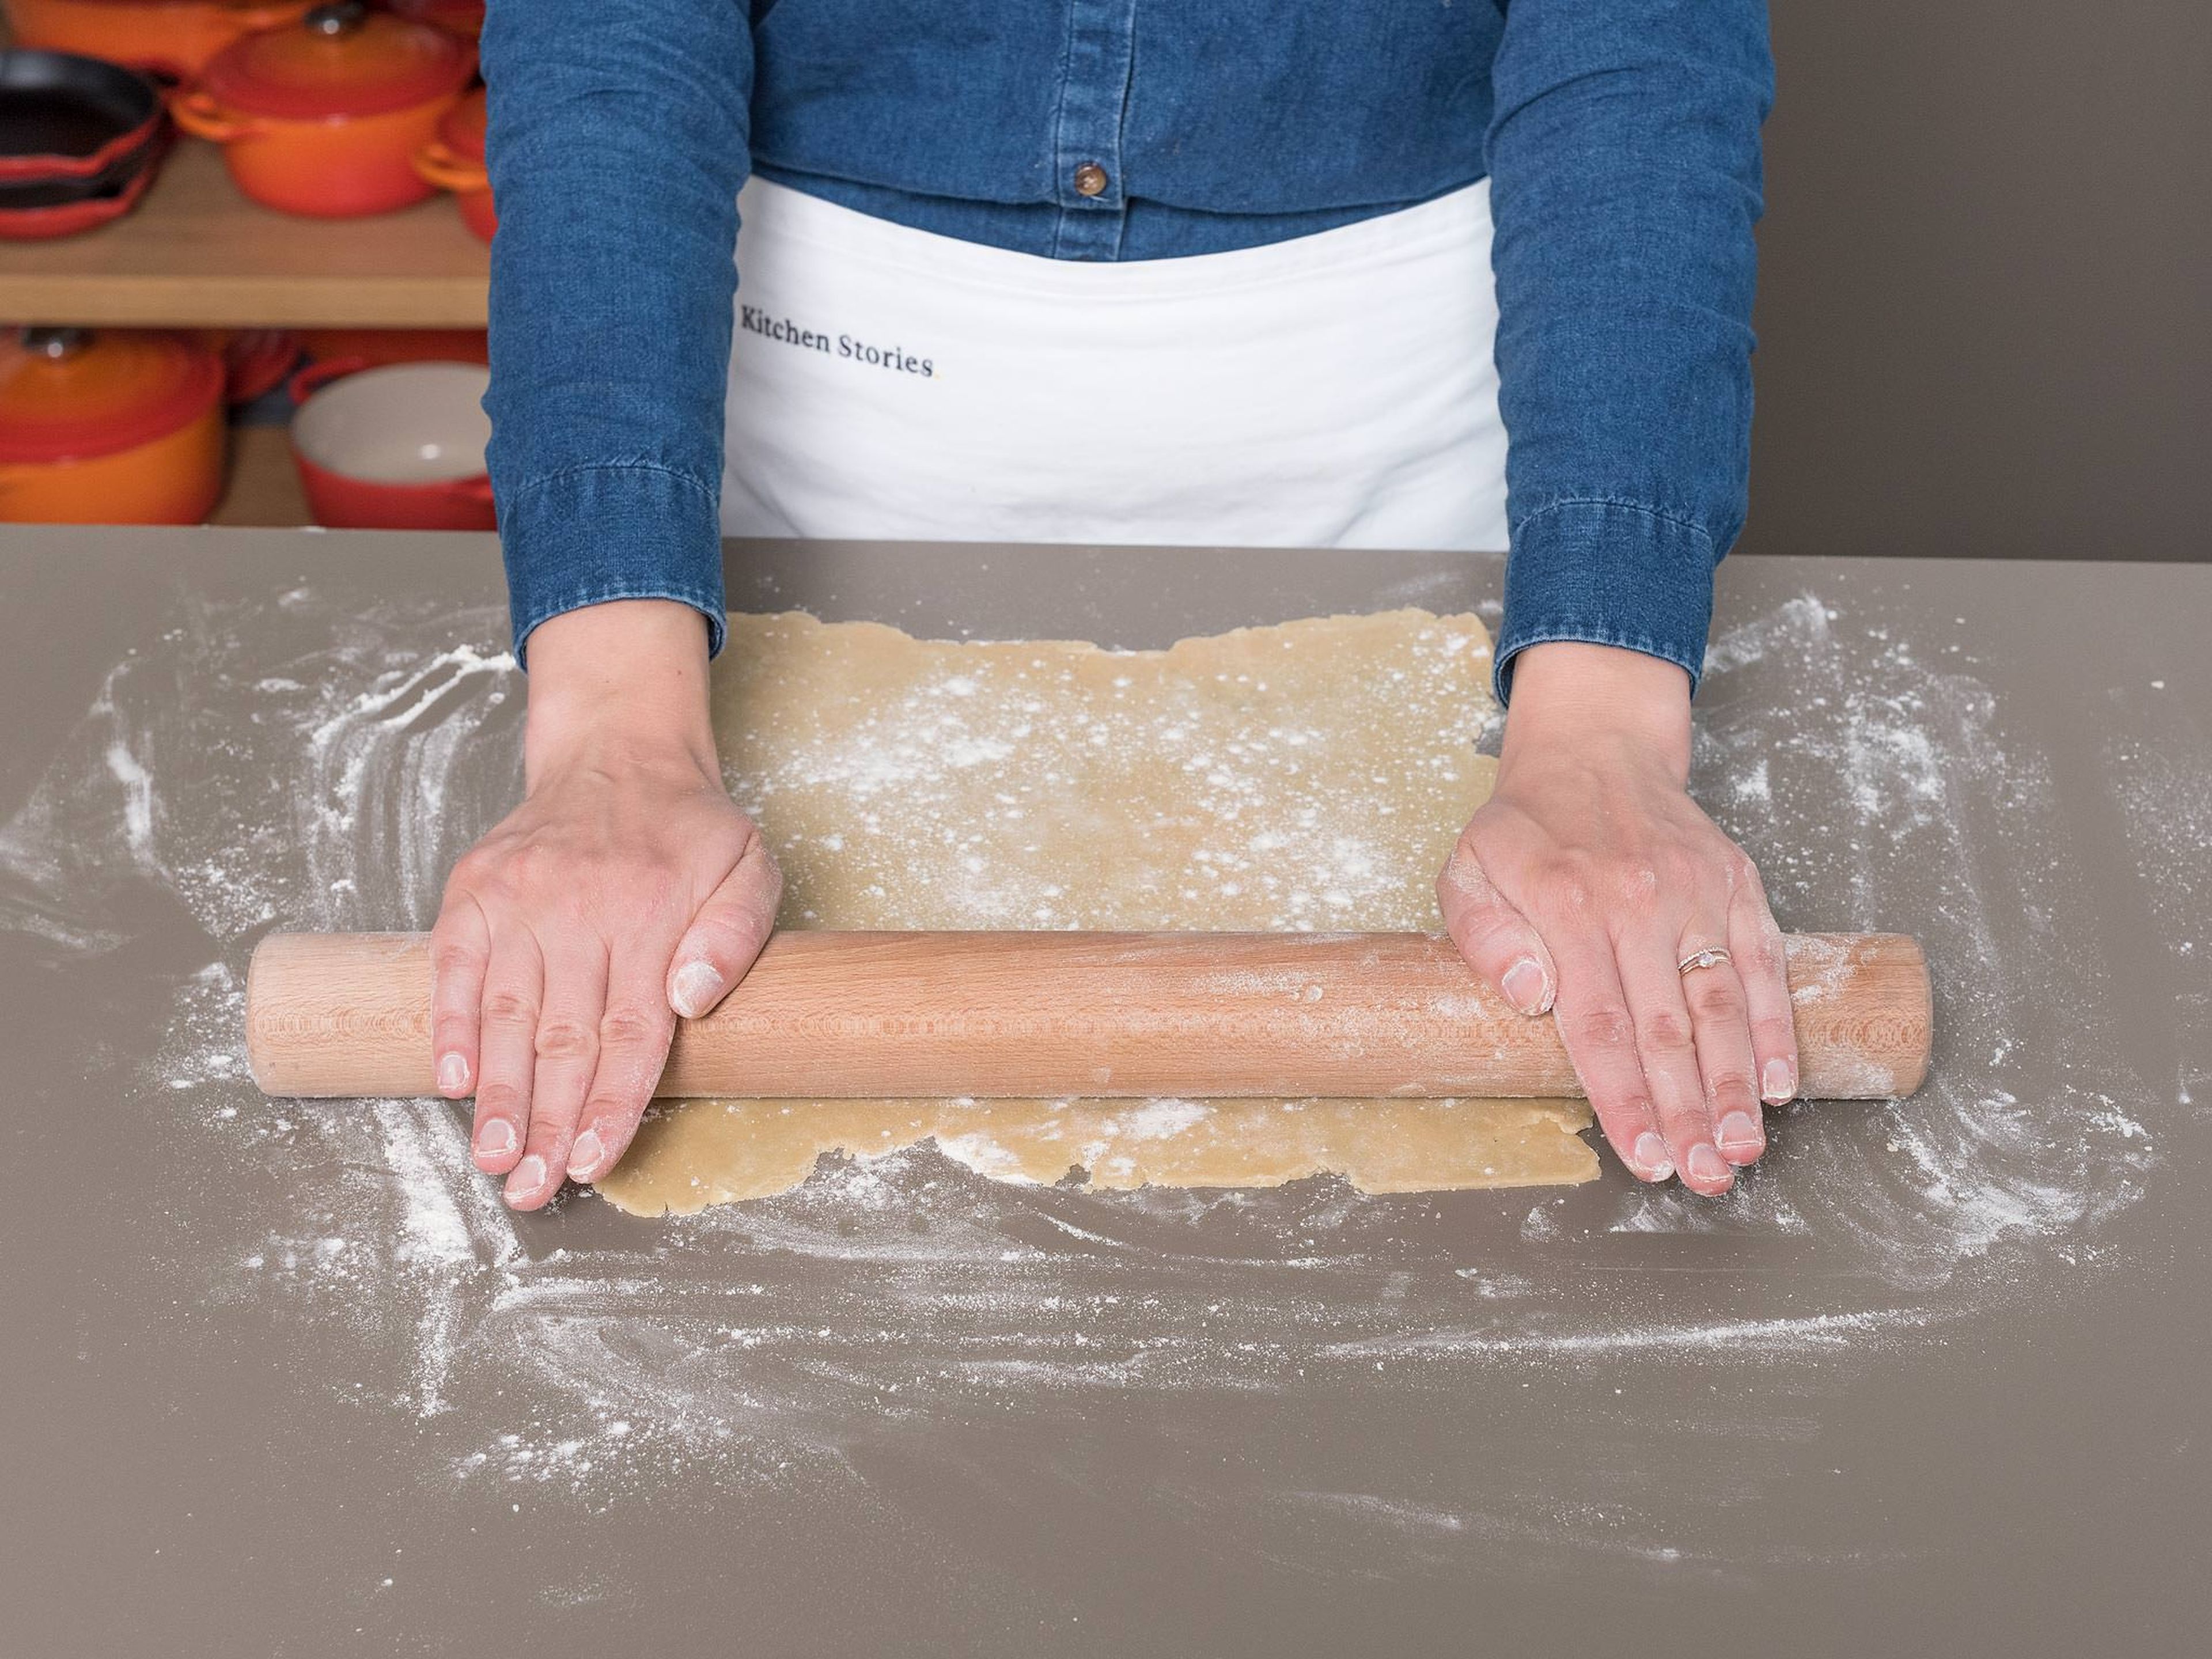 Preheat oven to 200°C/400°F. Remove the dough from the refrigerator and let it sit for approx. 5 min. at room temperature. On a lightly floured work surface, roll out dough to a 30-cm/12-in square. Carefully transfer the dough to a baking sheet lined with parchment paper. Spread mascarpone filling over the dough in an even layer, leaving a border around the edges.